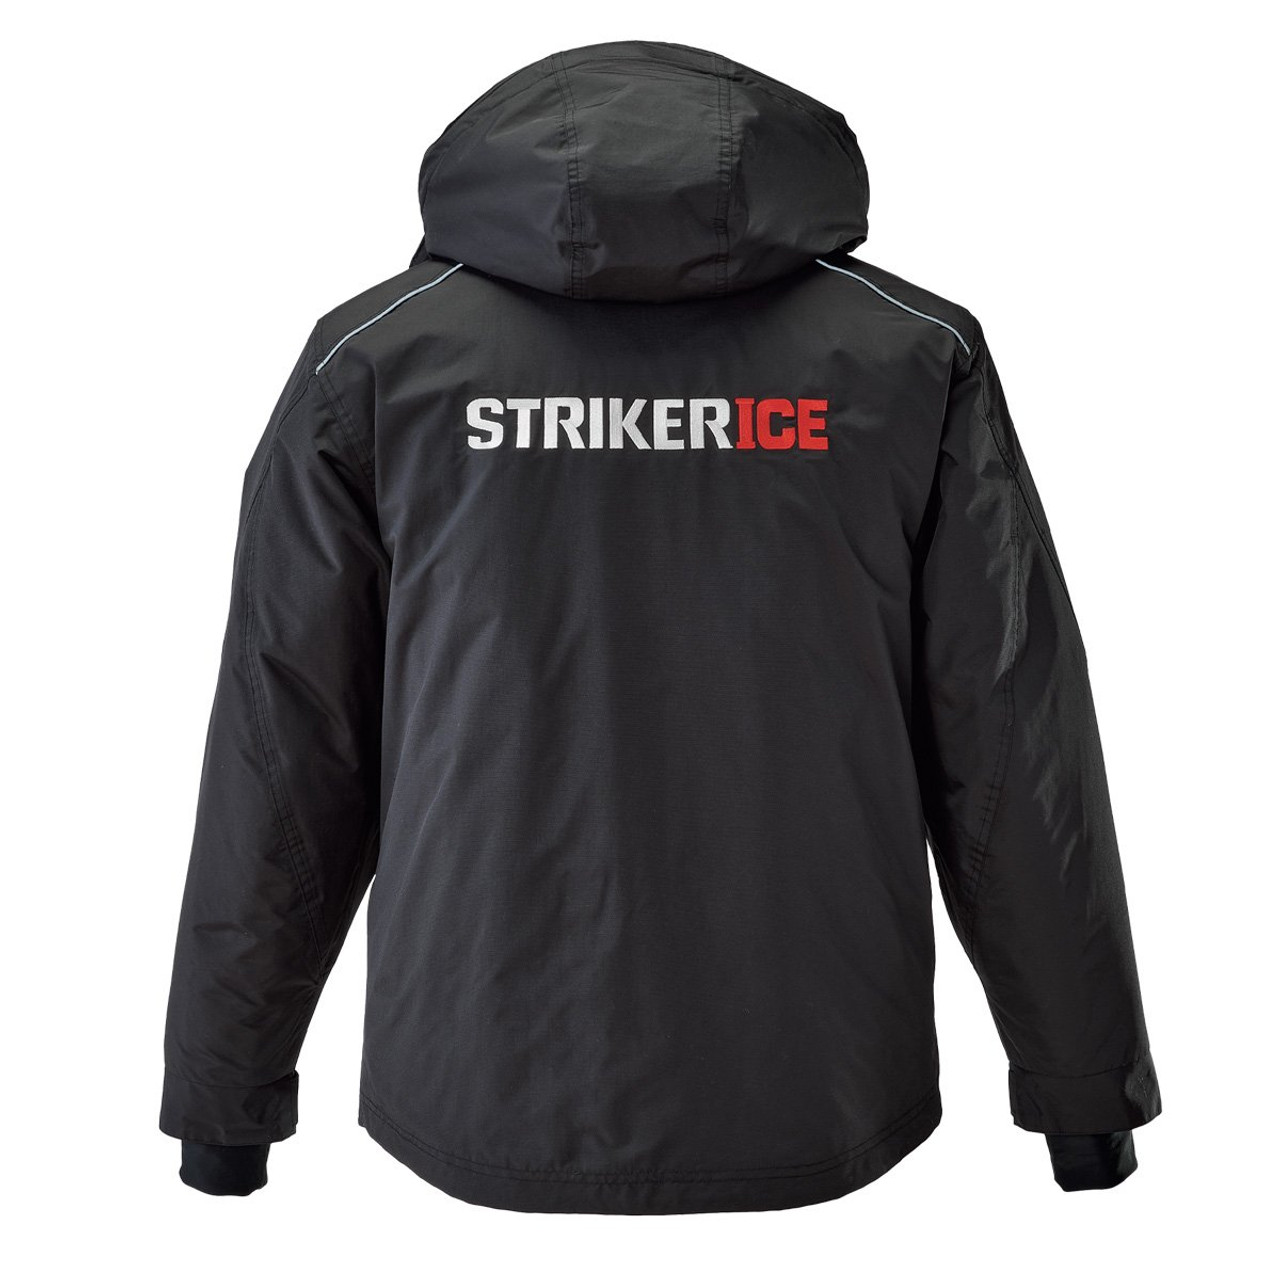 Striker Ice HardWater Floating Ice Fishing Jacket from